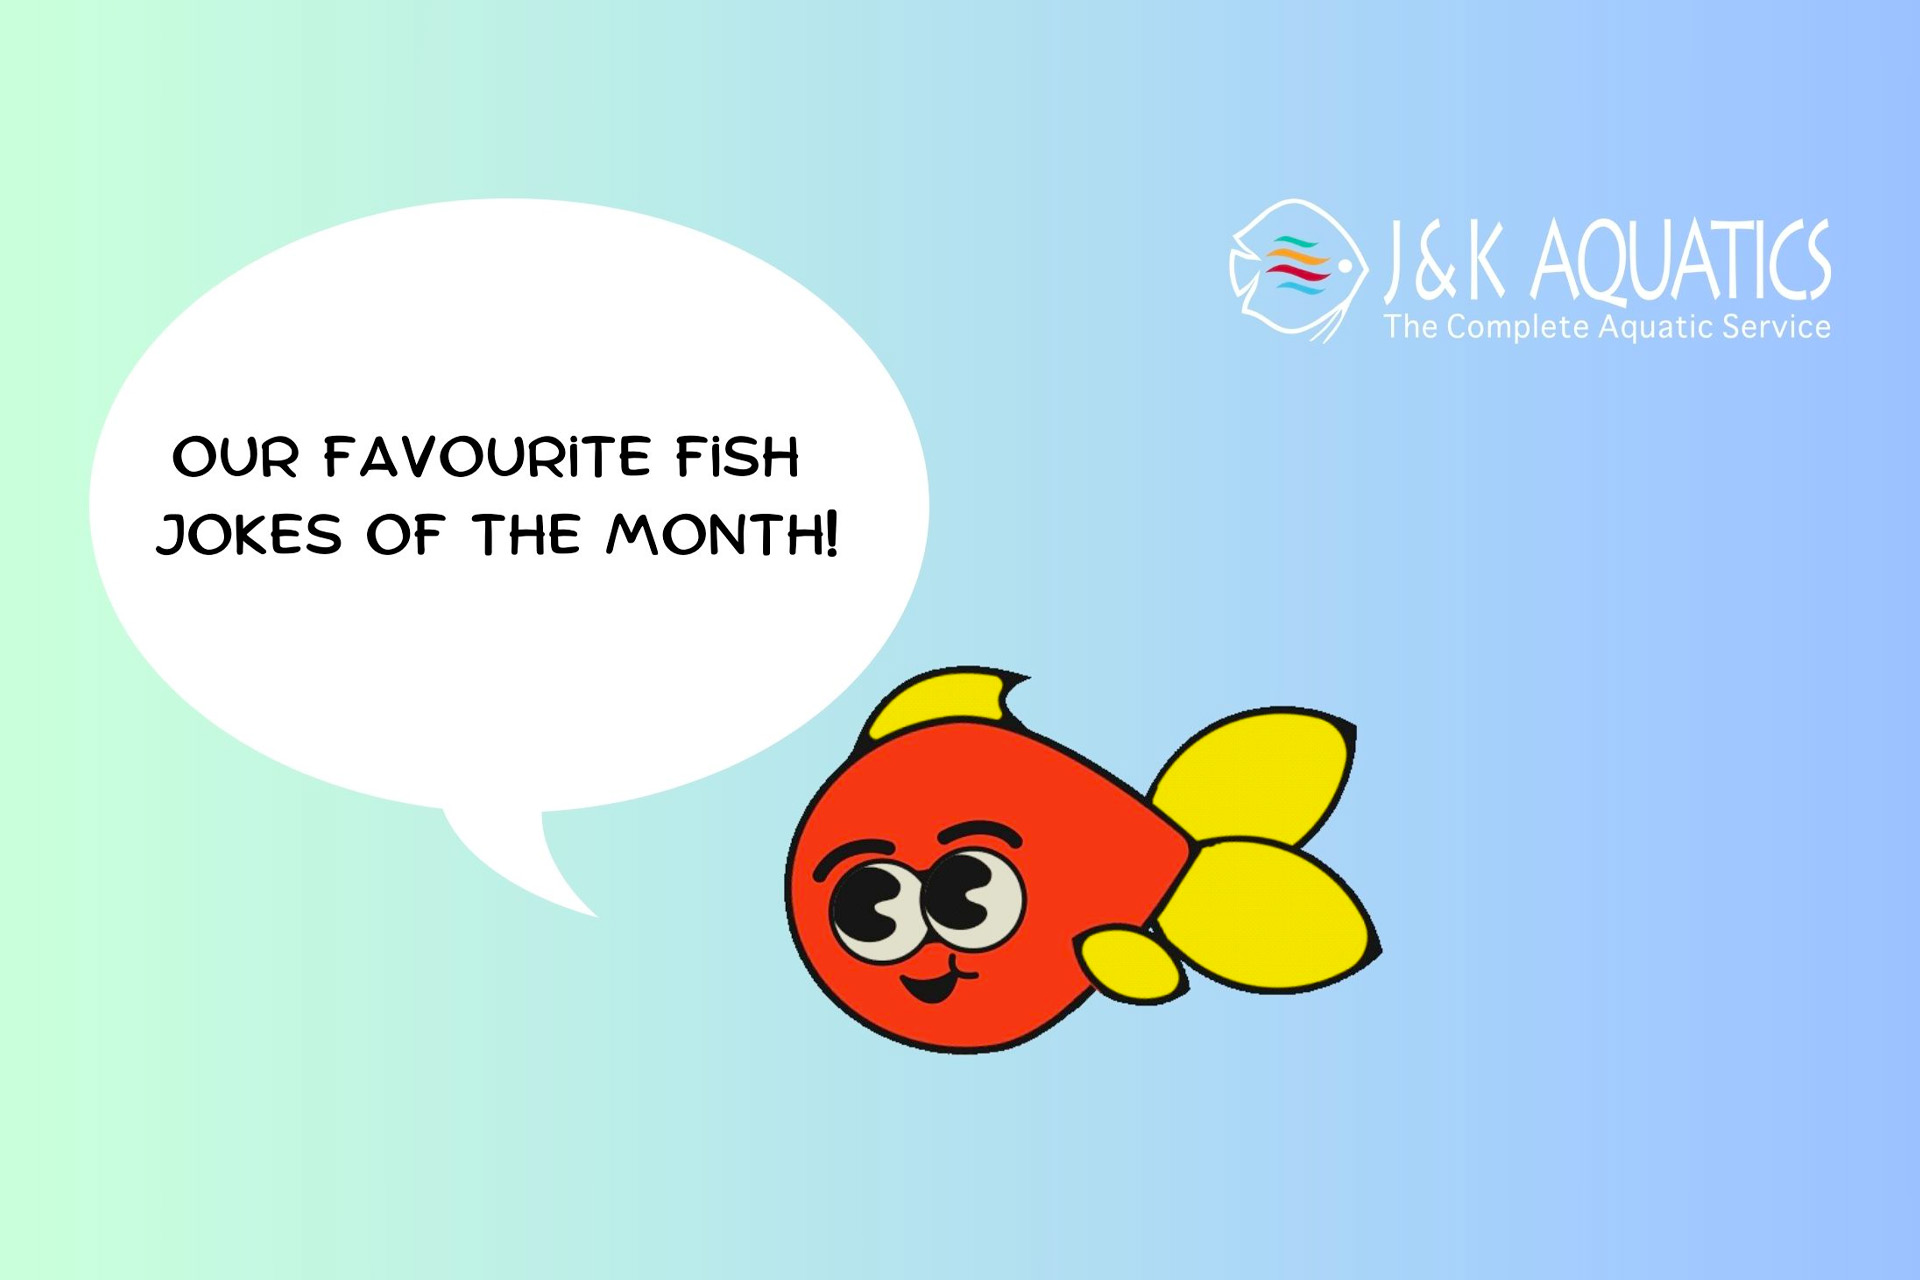 Our favourite fish jokes this month